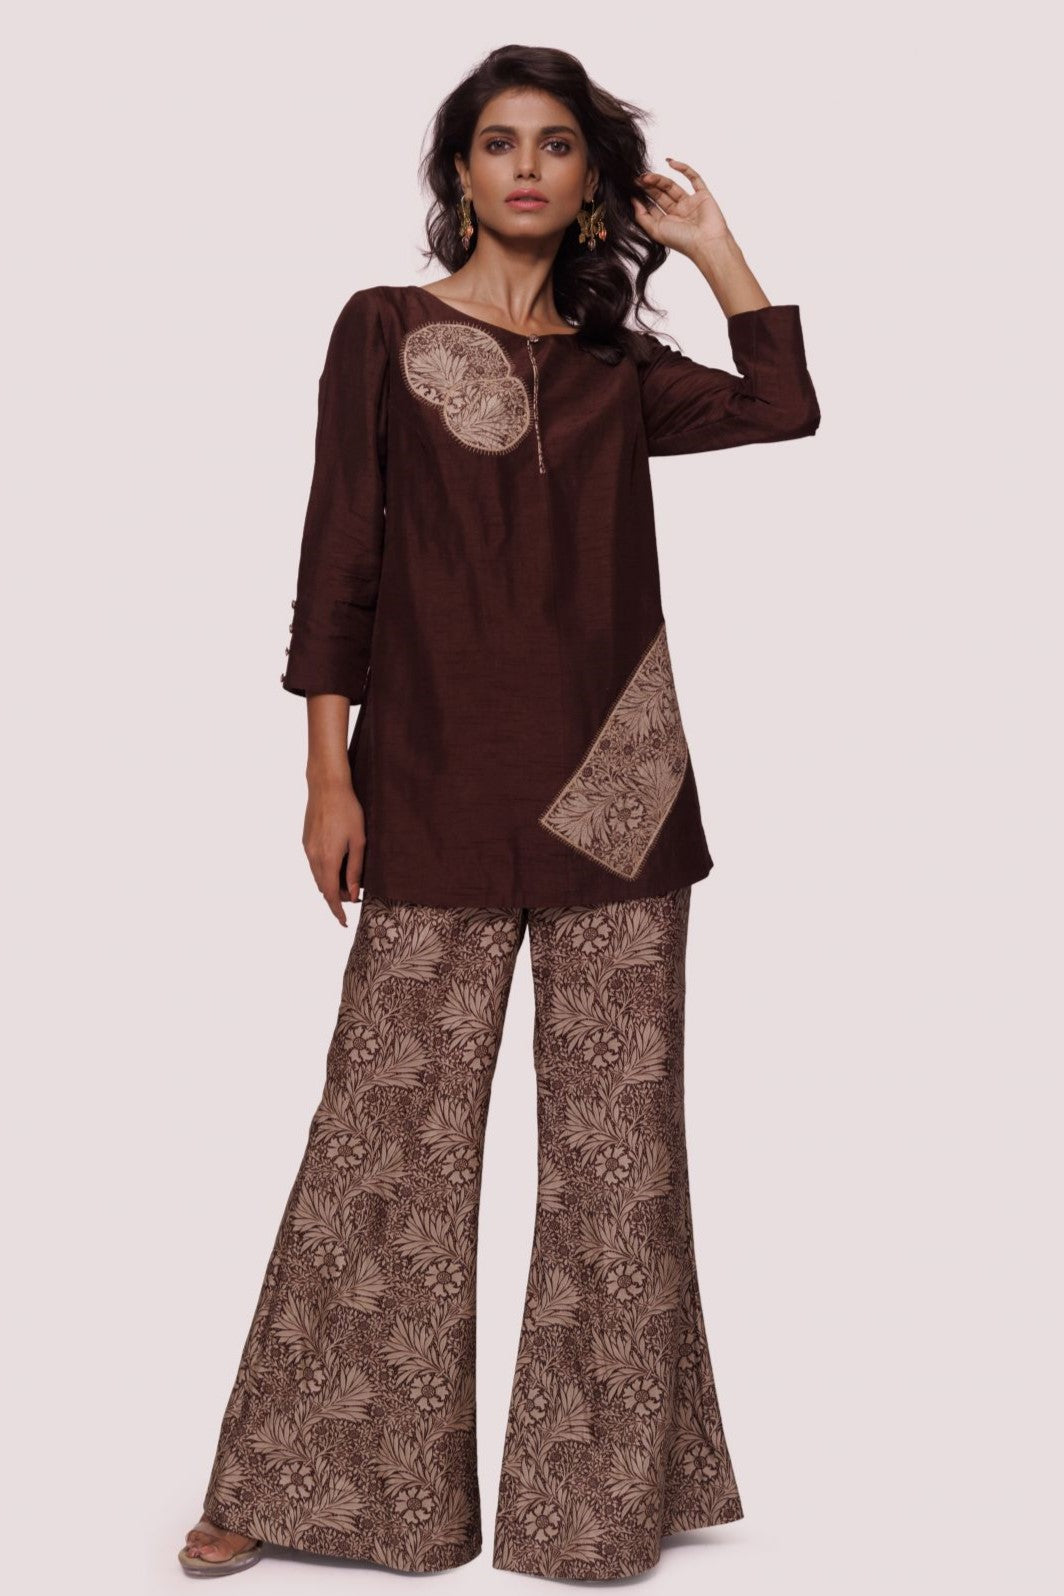 Shop elegant brown printed silk palazzo set online in USA. Shop the best and latest designs in embroidered sarees, designer sarees, Anarkali suit, lehengas, sharara suits for weddings and special occasions from Pure Elegance Indian fashion store in USA.-full view